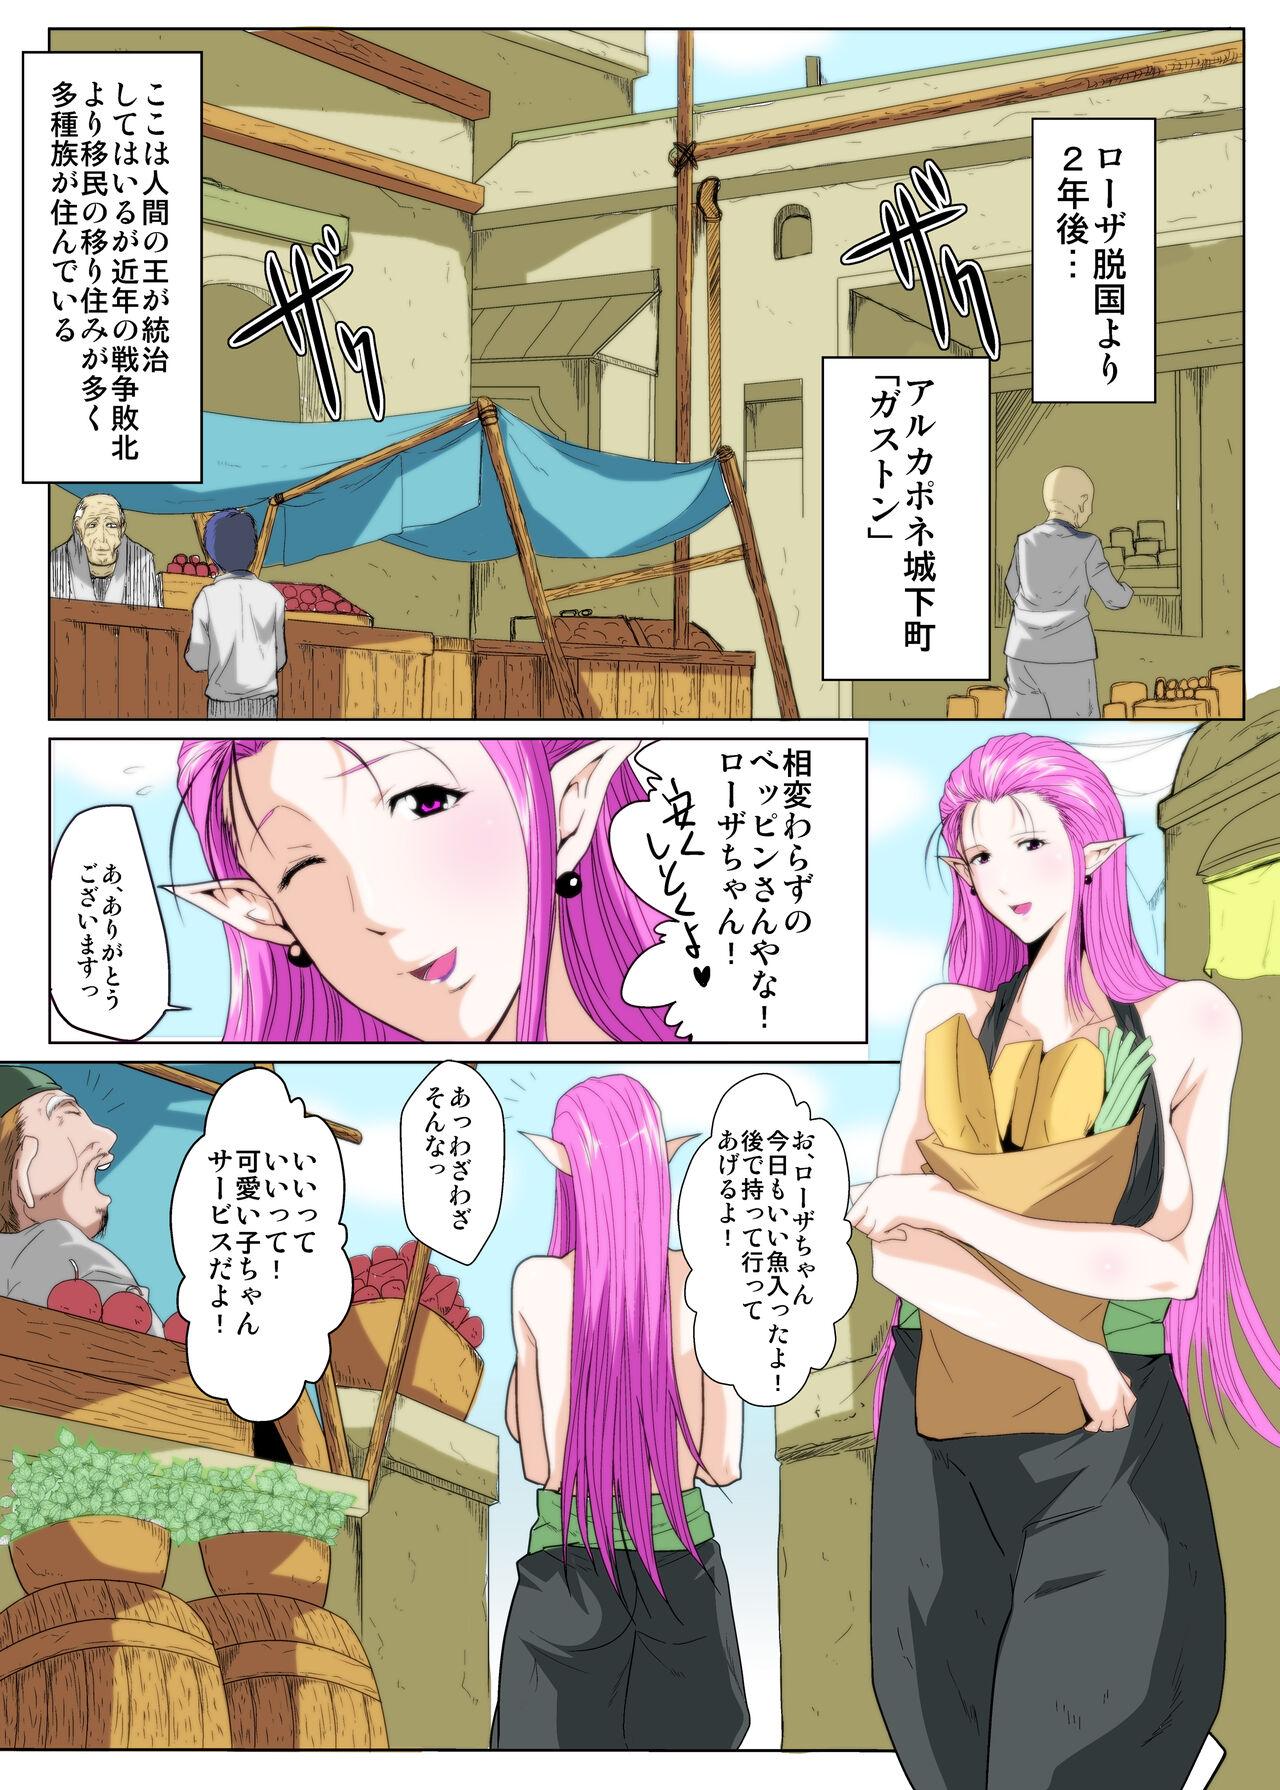 Bisex 僕の∞みんなの彼女 Longhair - Page 3